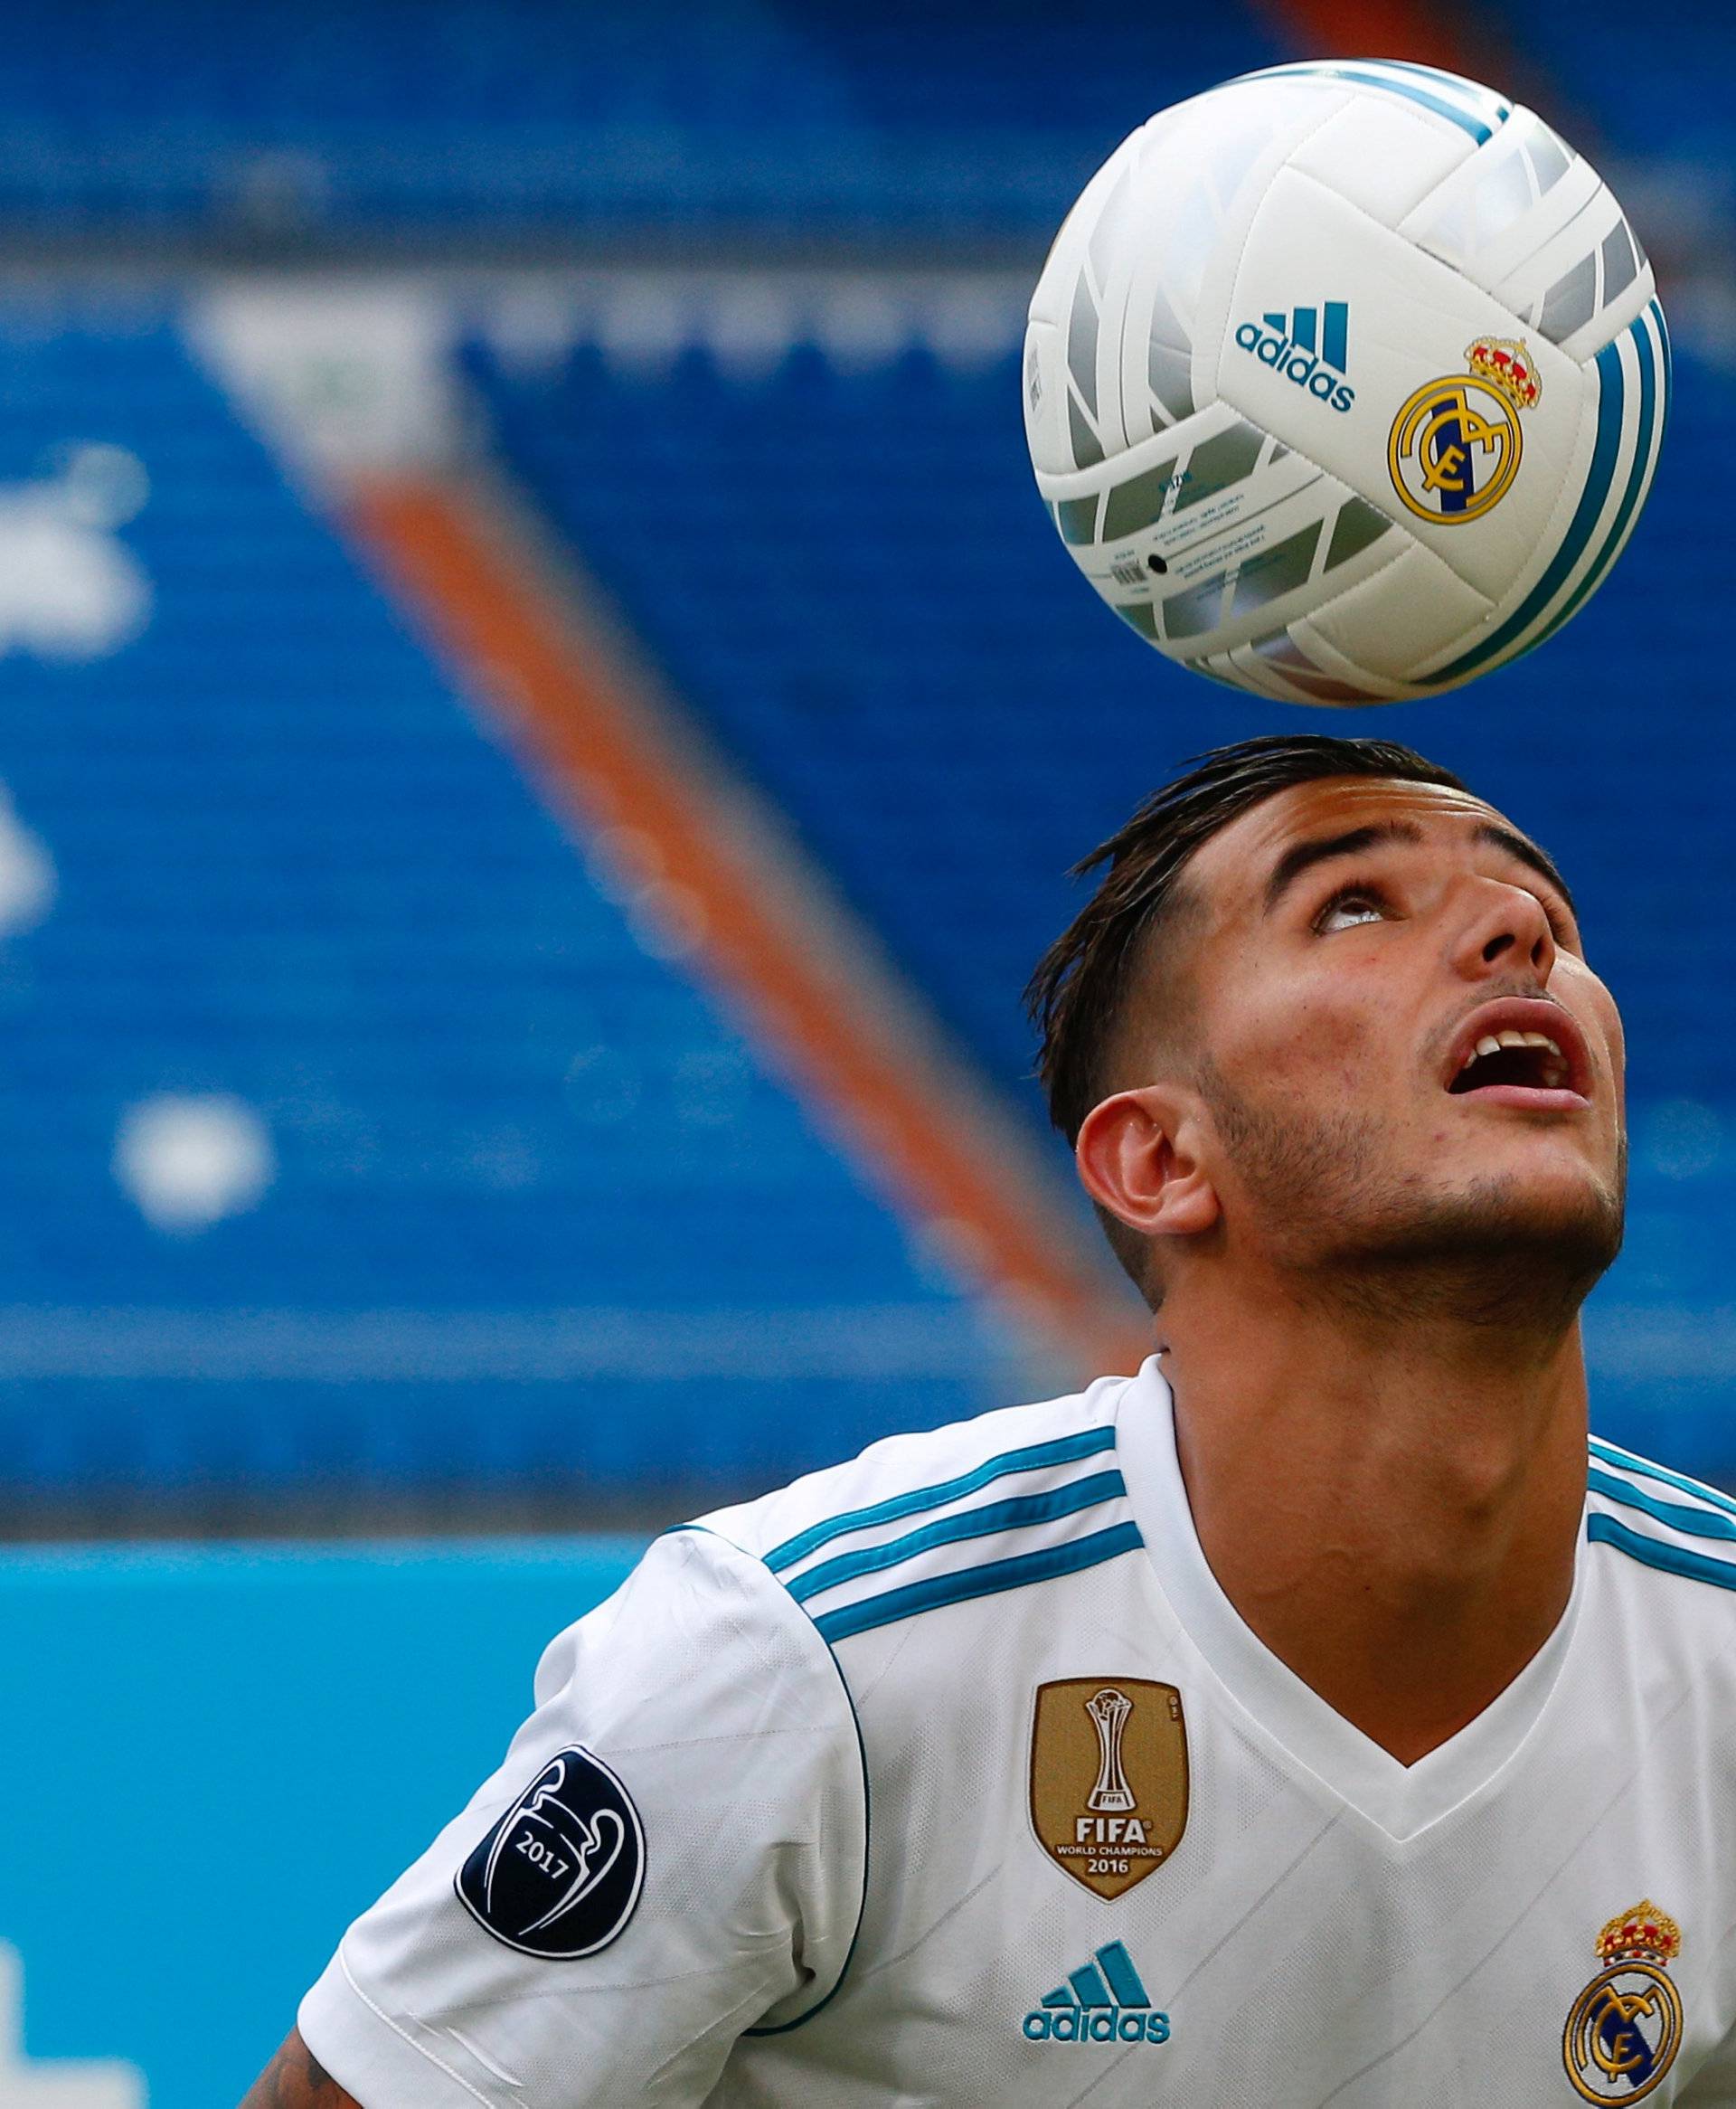 Real Madrid's new player Theo Hernandez heads the ball during his presentation at the Santiago Bernabeu Stadium in Madrid